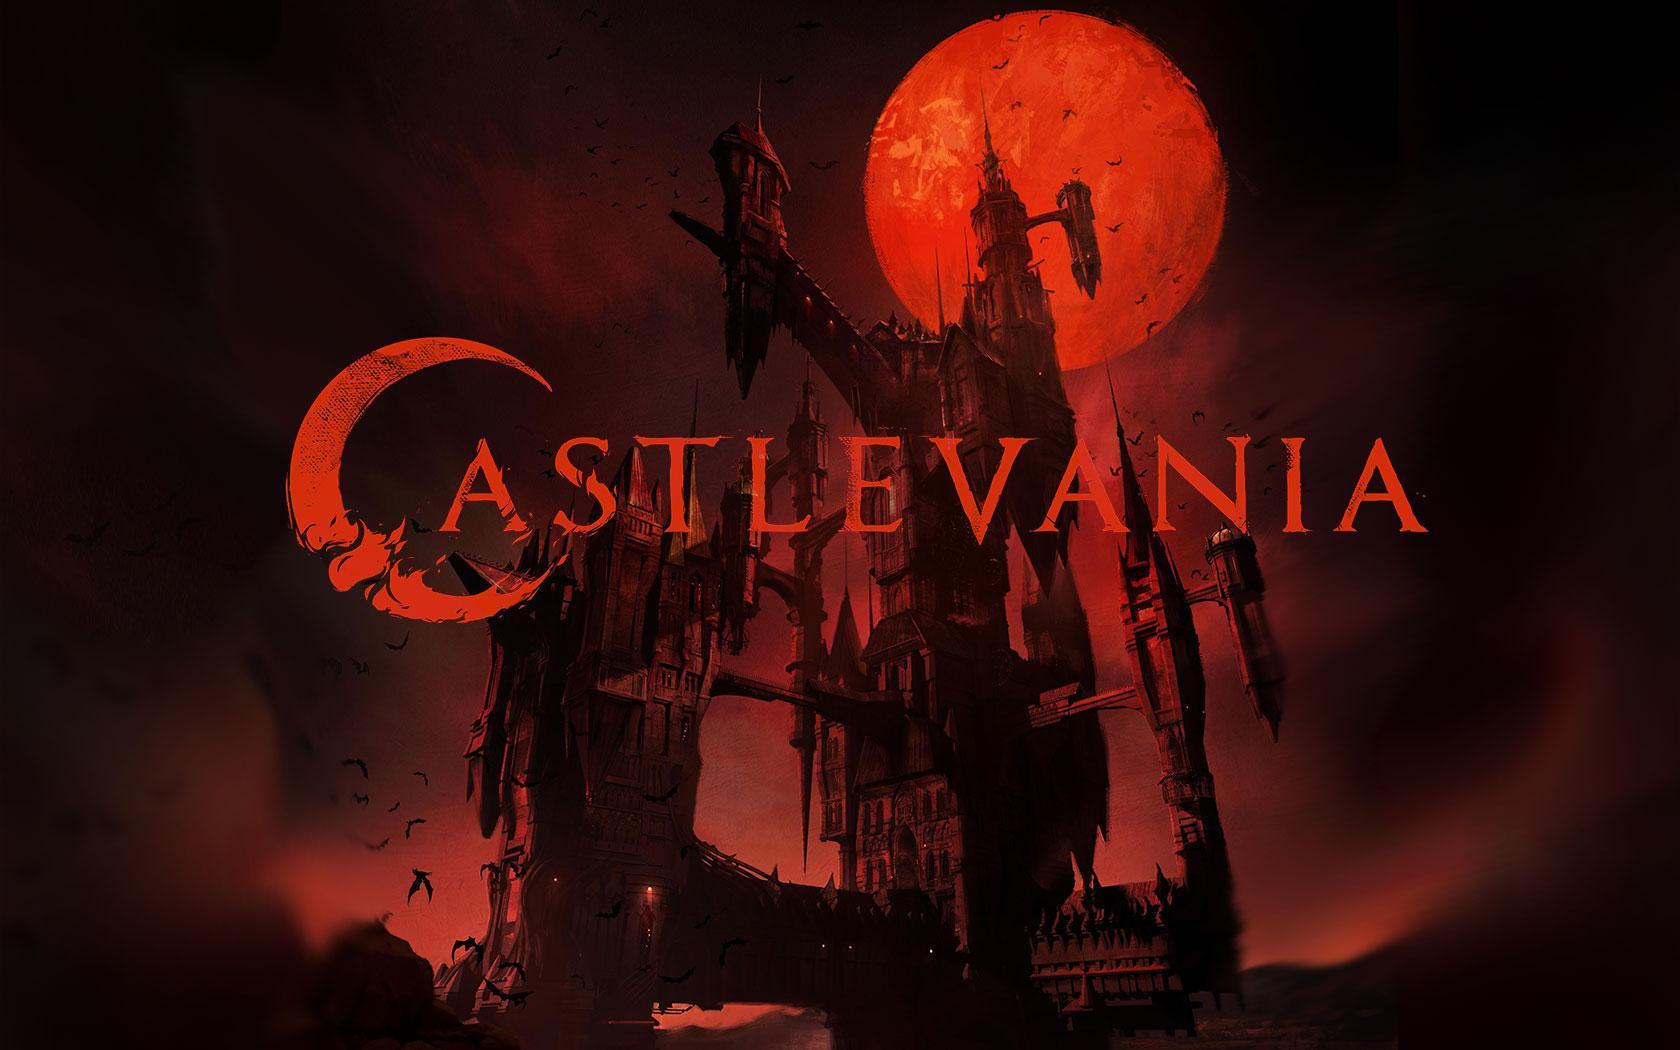 Castlevania Symphony Of The Night cool wallpaper, Castlevania Symphony Of The Night, Game